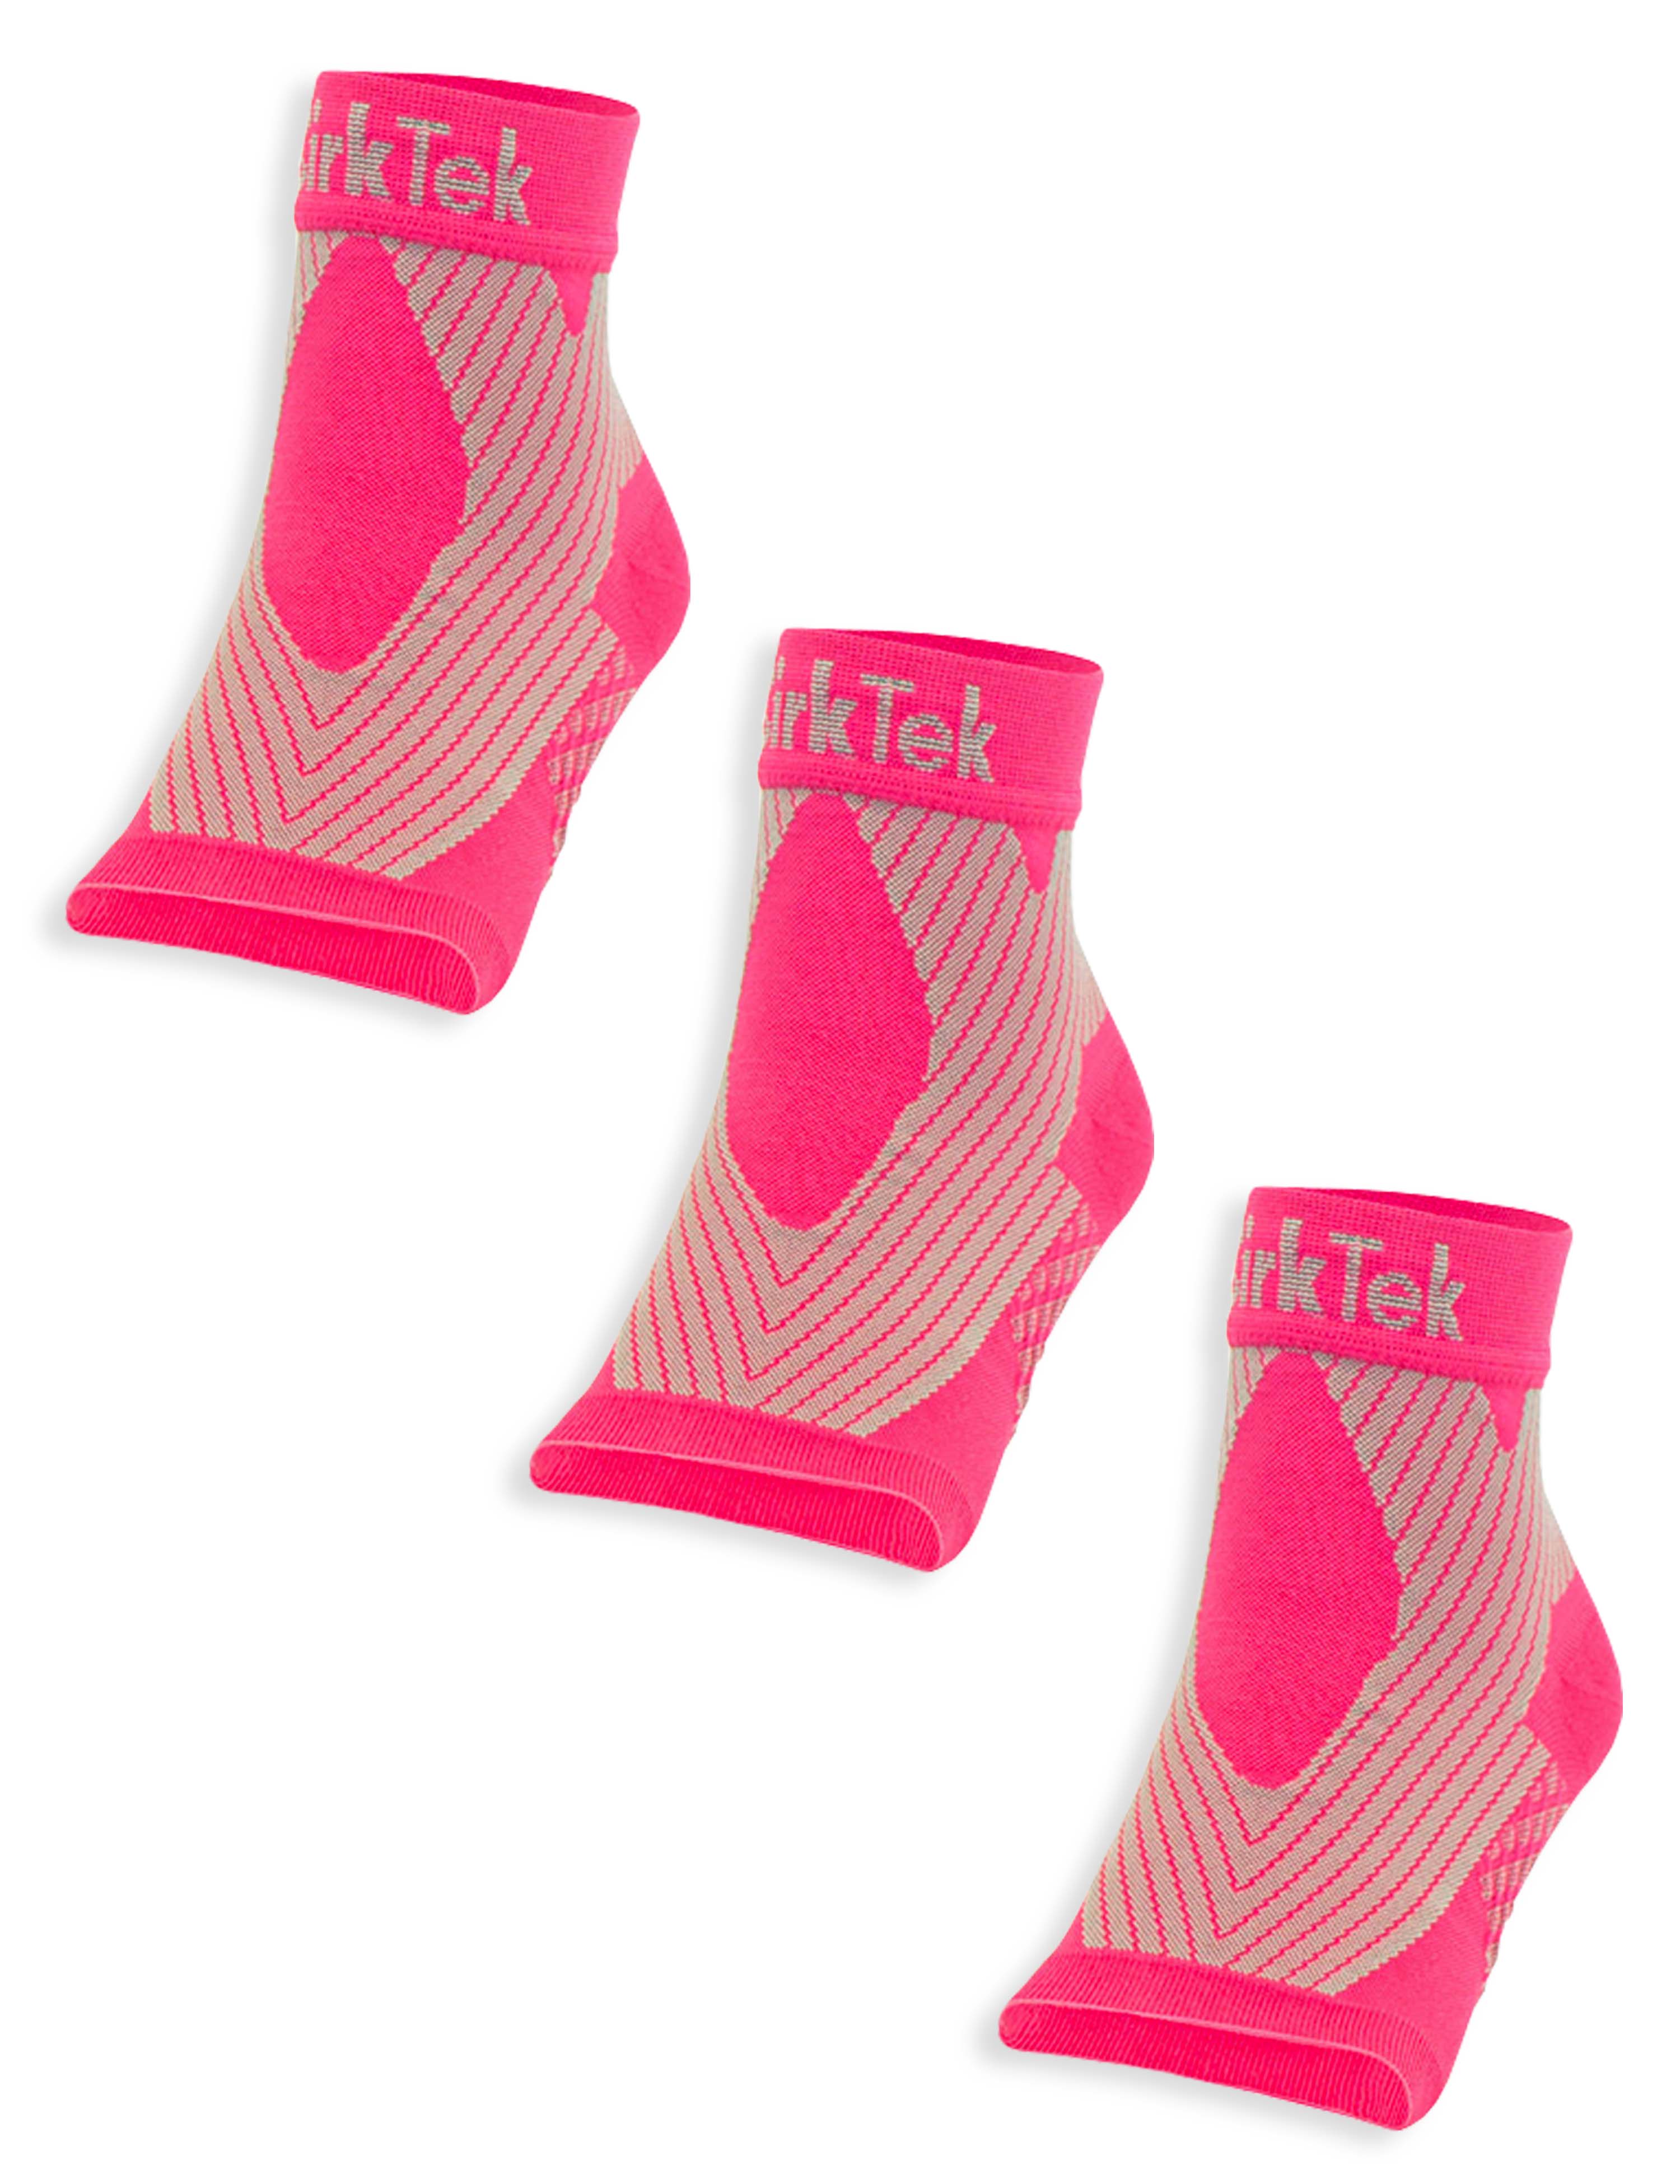 Ankle Sleeve 20-30 mmHg 3PACK - Pink